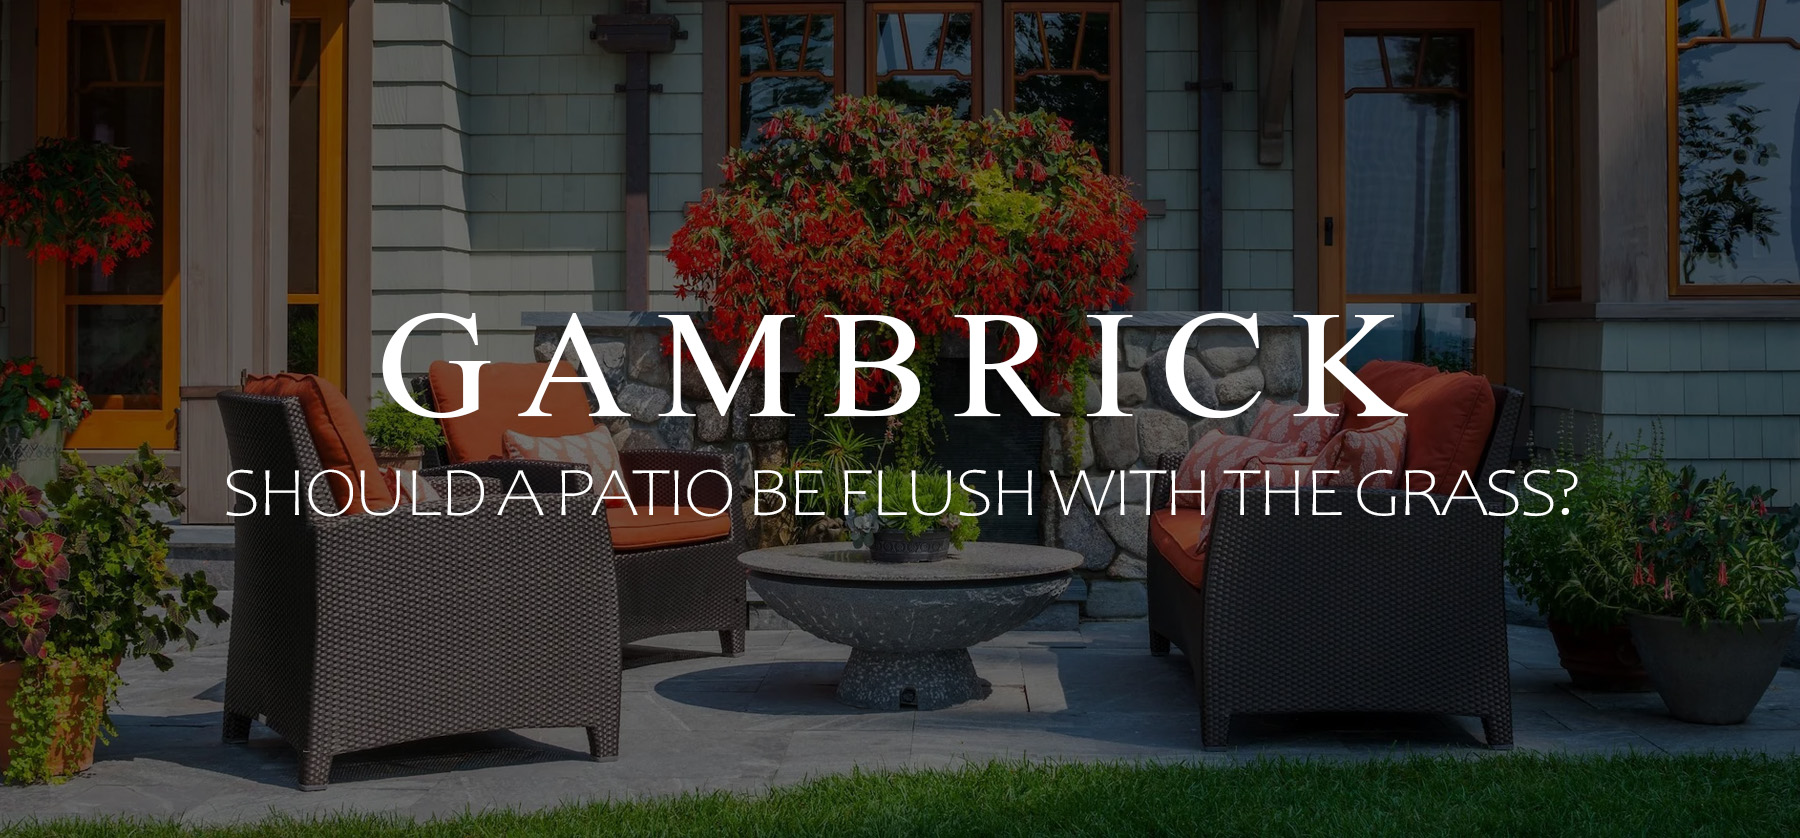 should a patio be flush with the grass banner